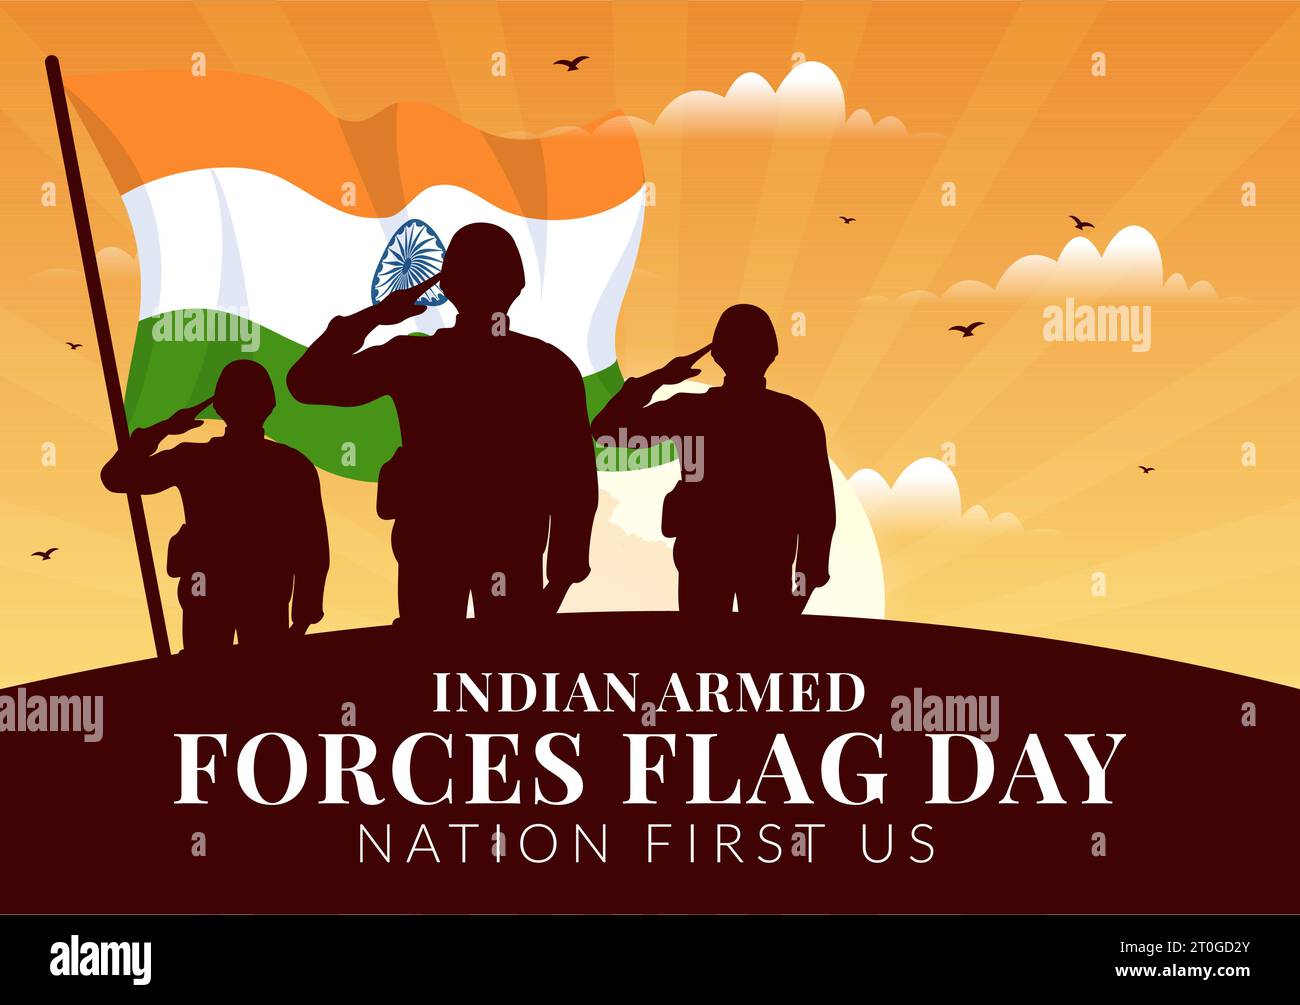 Indian Armed Forces Flag Day Vector Illustration with India and Army Flags in National Holiday Flat Cartoon Background Design Stock Vector